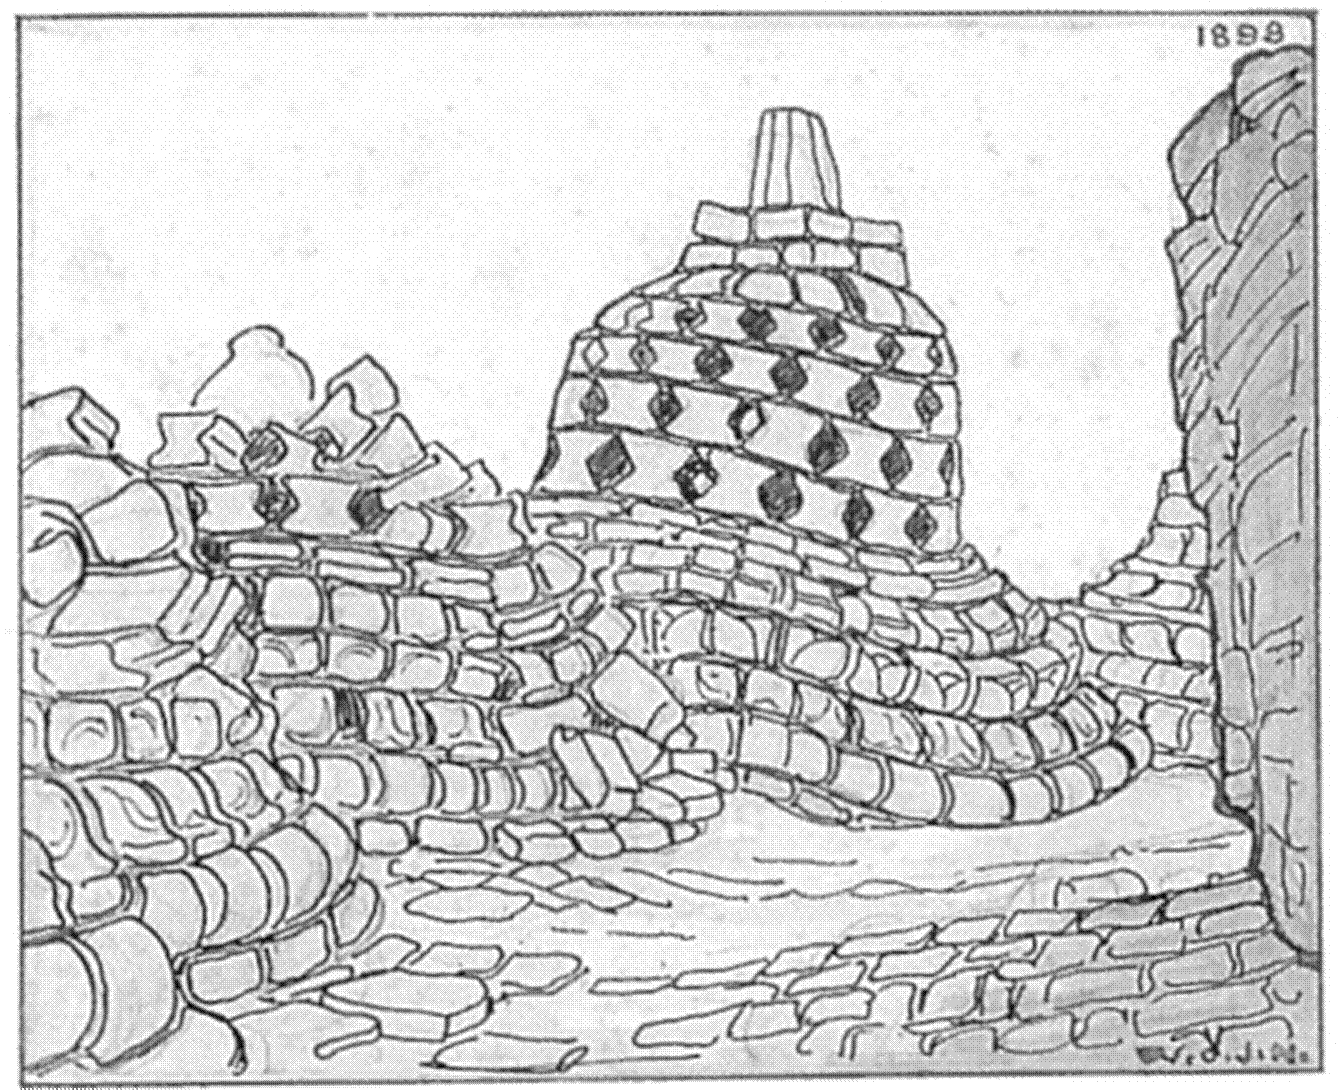 A sketch of stupas at Boroboedoer Temple 1898, by W.O.J. Nieuwnkamp (This photograph is new, replaced. Carpenter, Bruce W., W. O. J.Nieuwenkamp, First European artist in Bali, PeriPlus Editions (HK) Ltd, Singapore 1997)